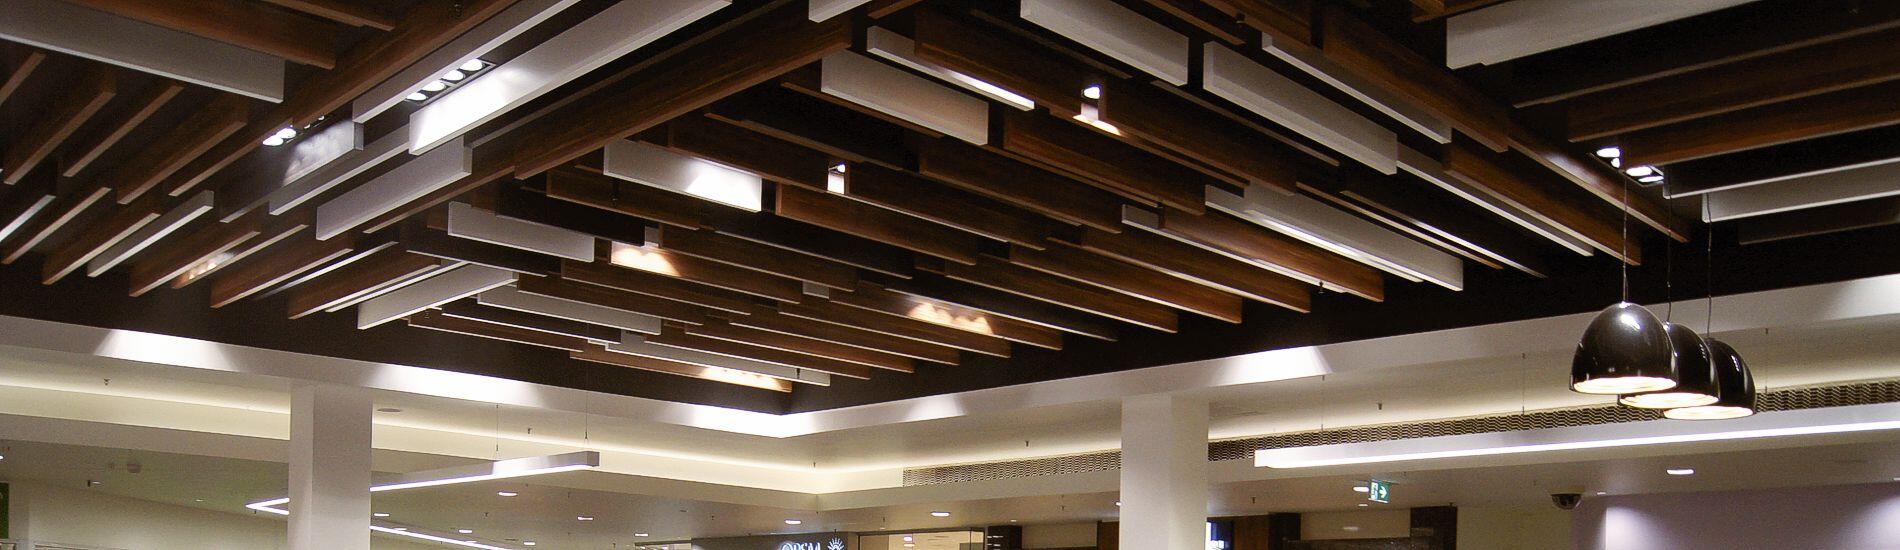 Decorative use of MAXI BEAM in mixed profiles and finishes for feature shopping mall ceilings